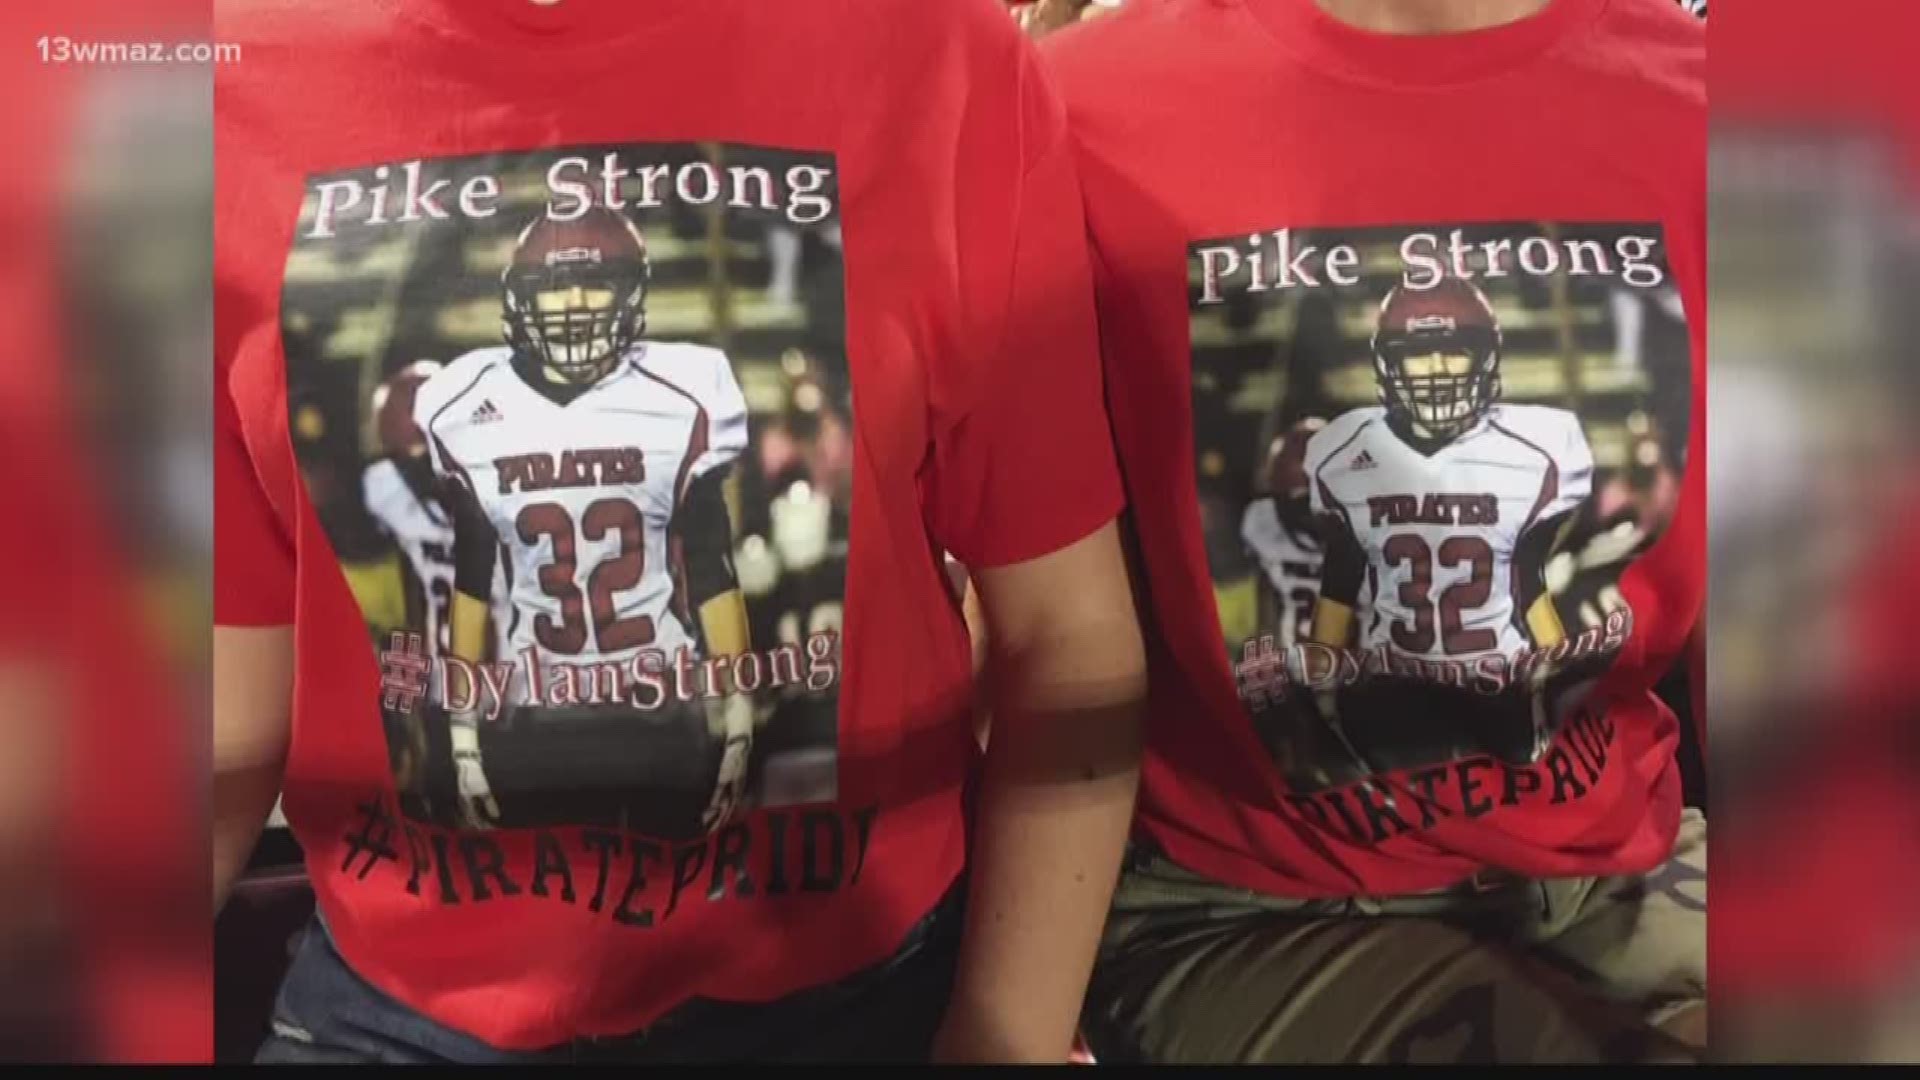 Rutland pays tribute to Pike County